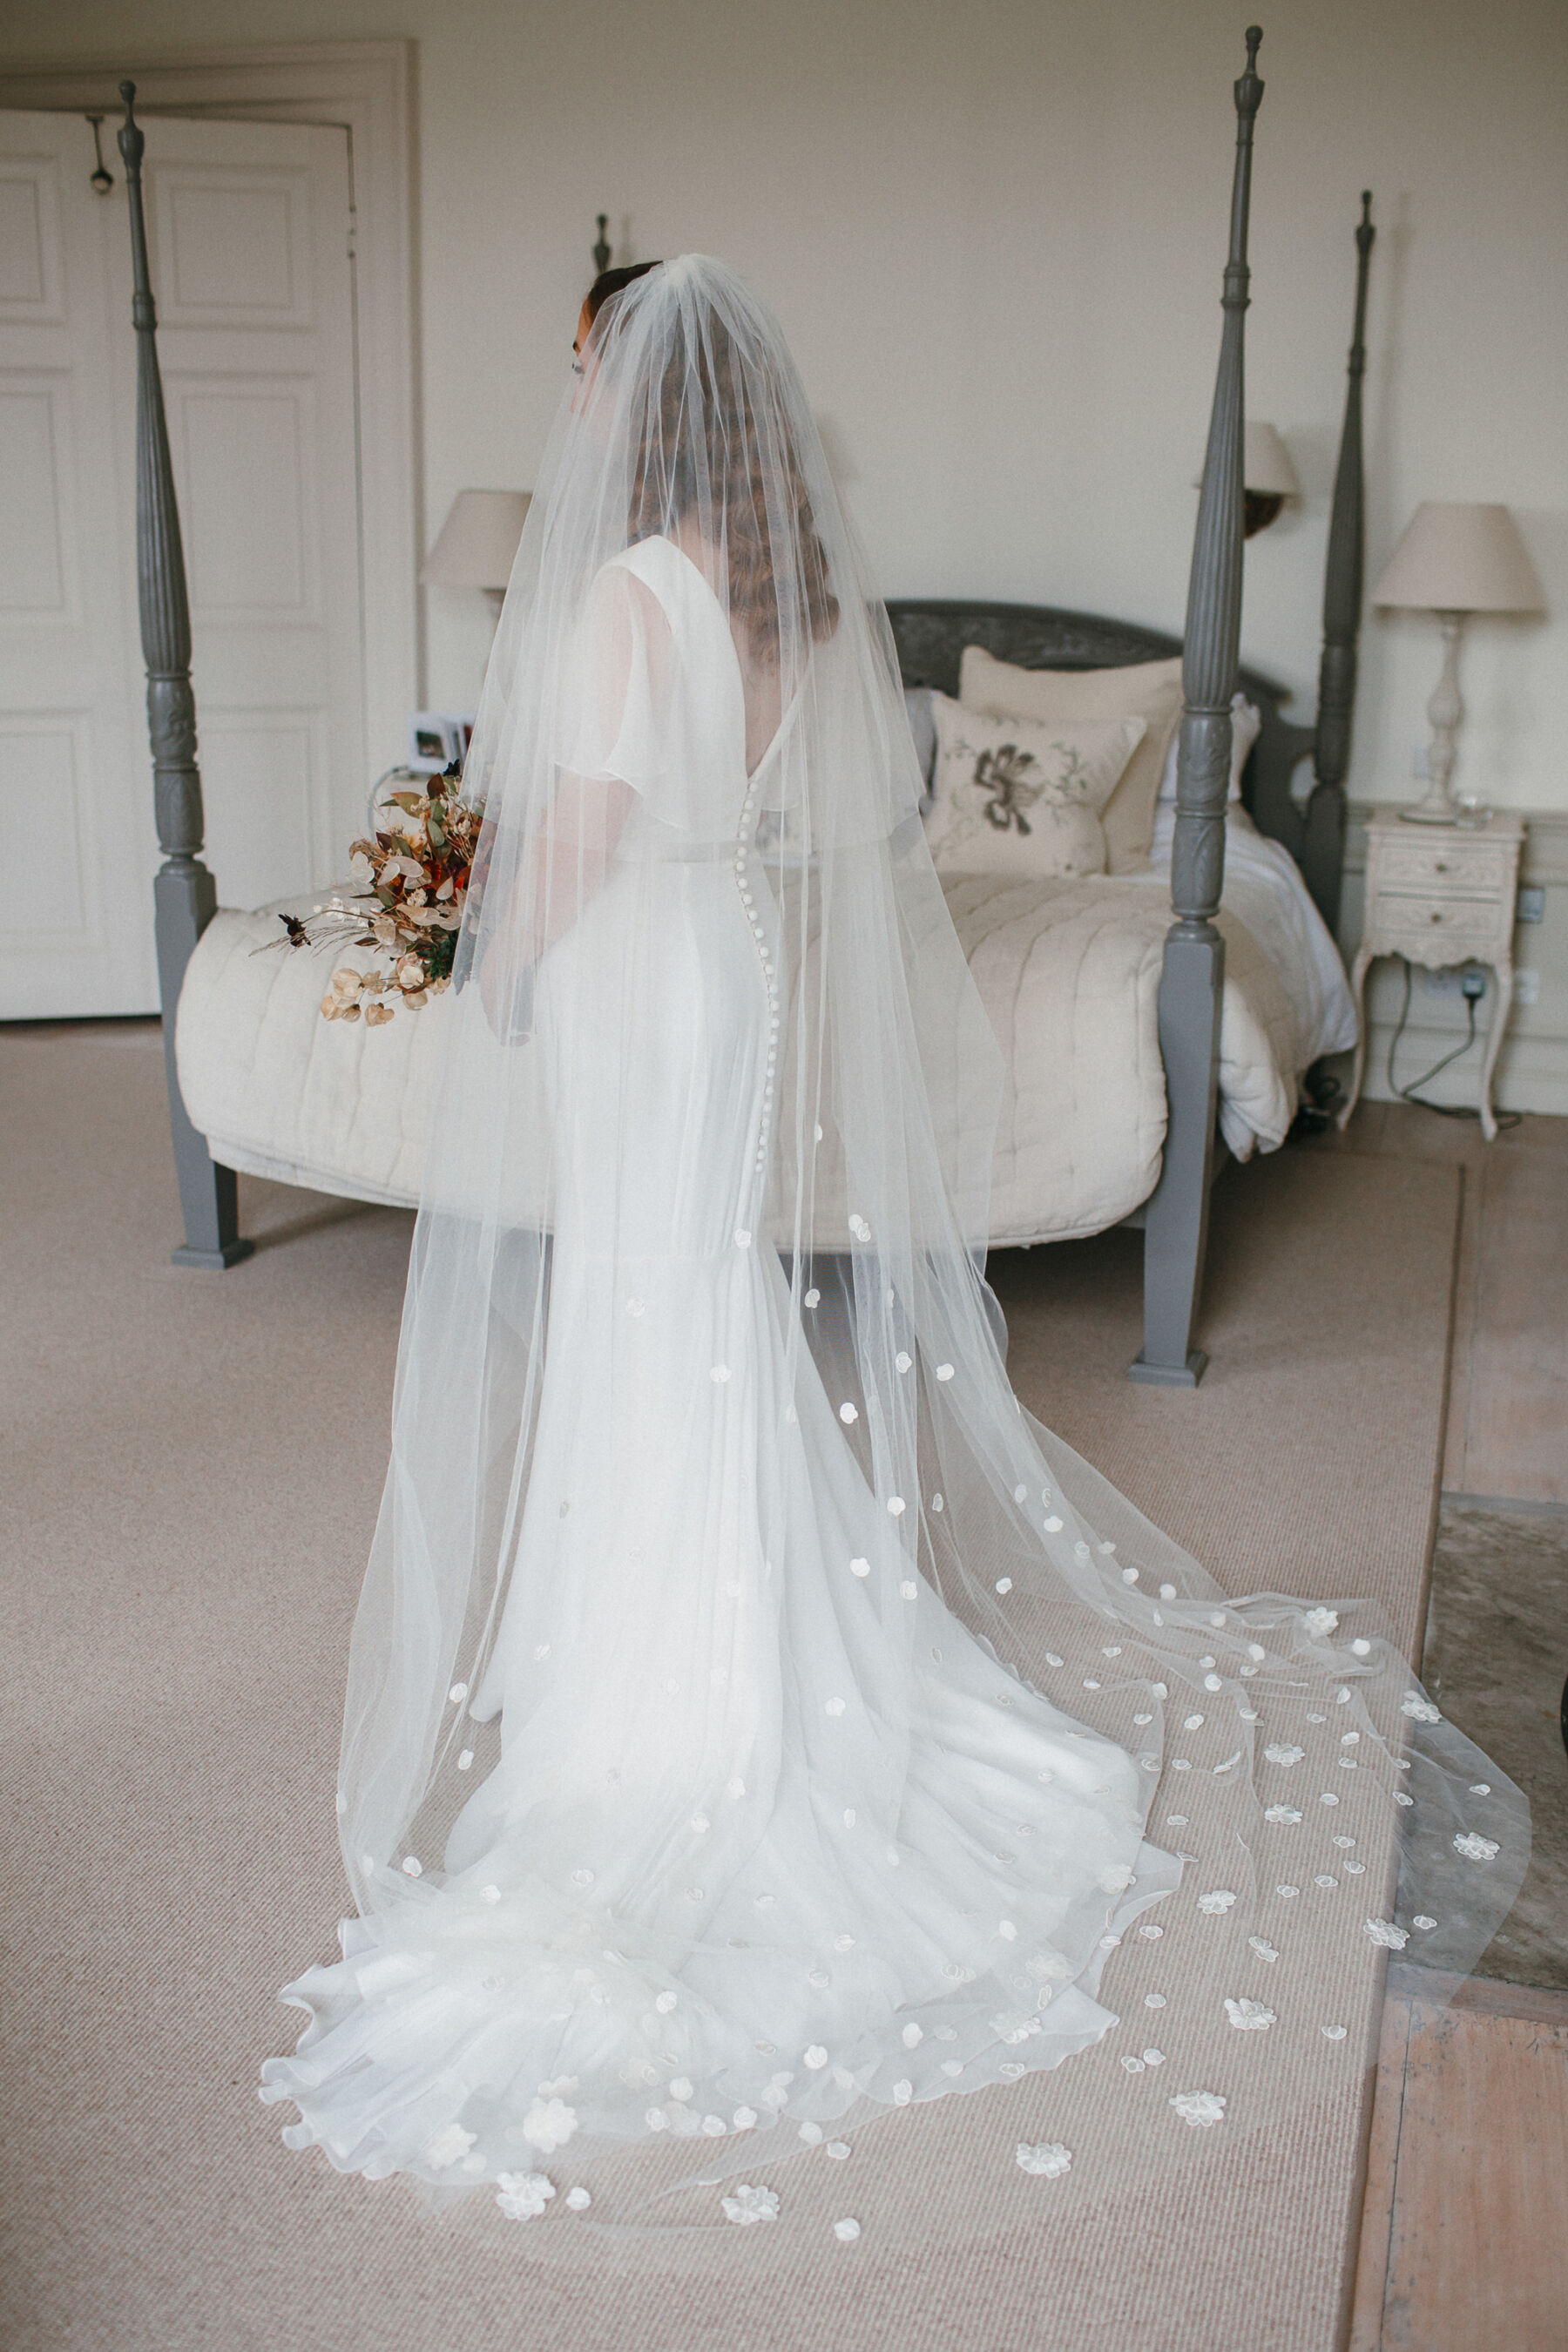 Photograph of a bride facing away from the camera wearing a long wedding veil by Suzanne Neville that is adorned with silk wedding flowers. 